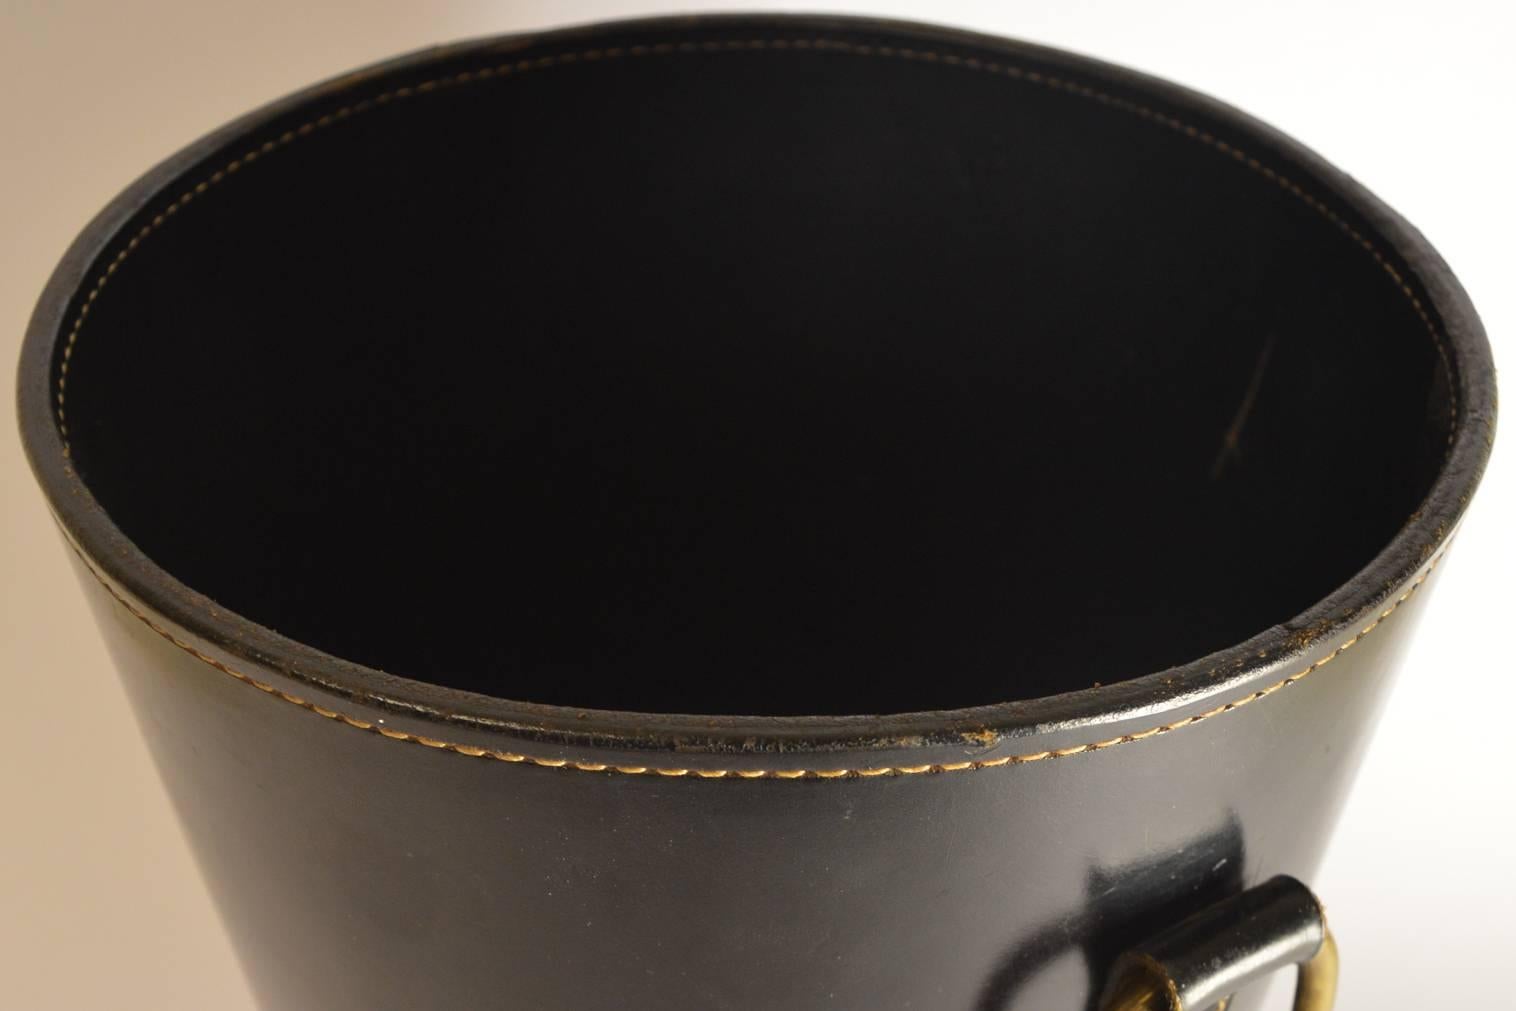 This rare and original Mid-Century thick black leather bin with brass detail designed by Carl Auböck and manufactured by his werkstätte in Vienna. 

In great condition. Dimensions: H 31 cm x D 25 cm.